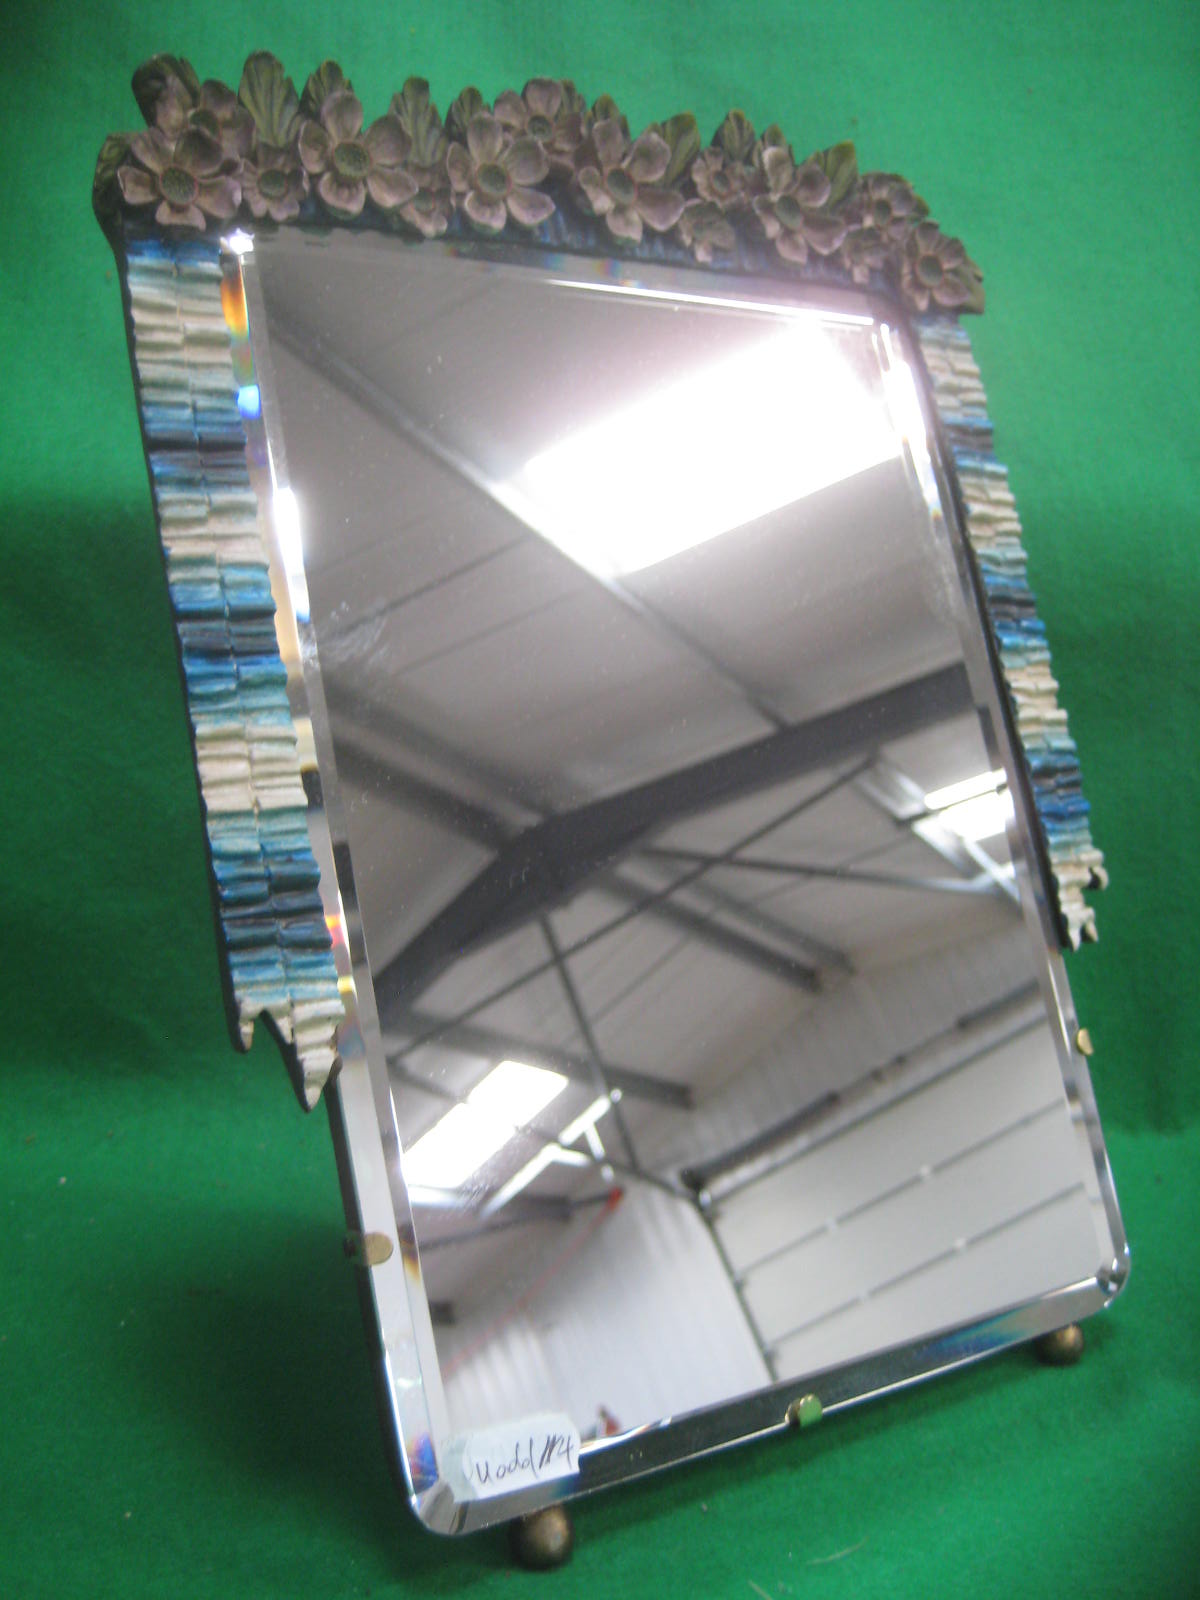 A Barbola floral easel mirror